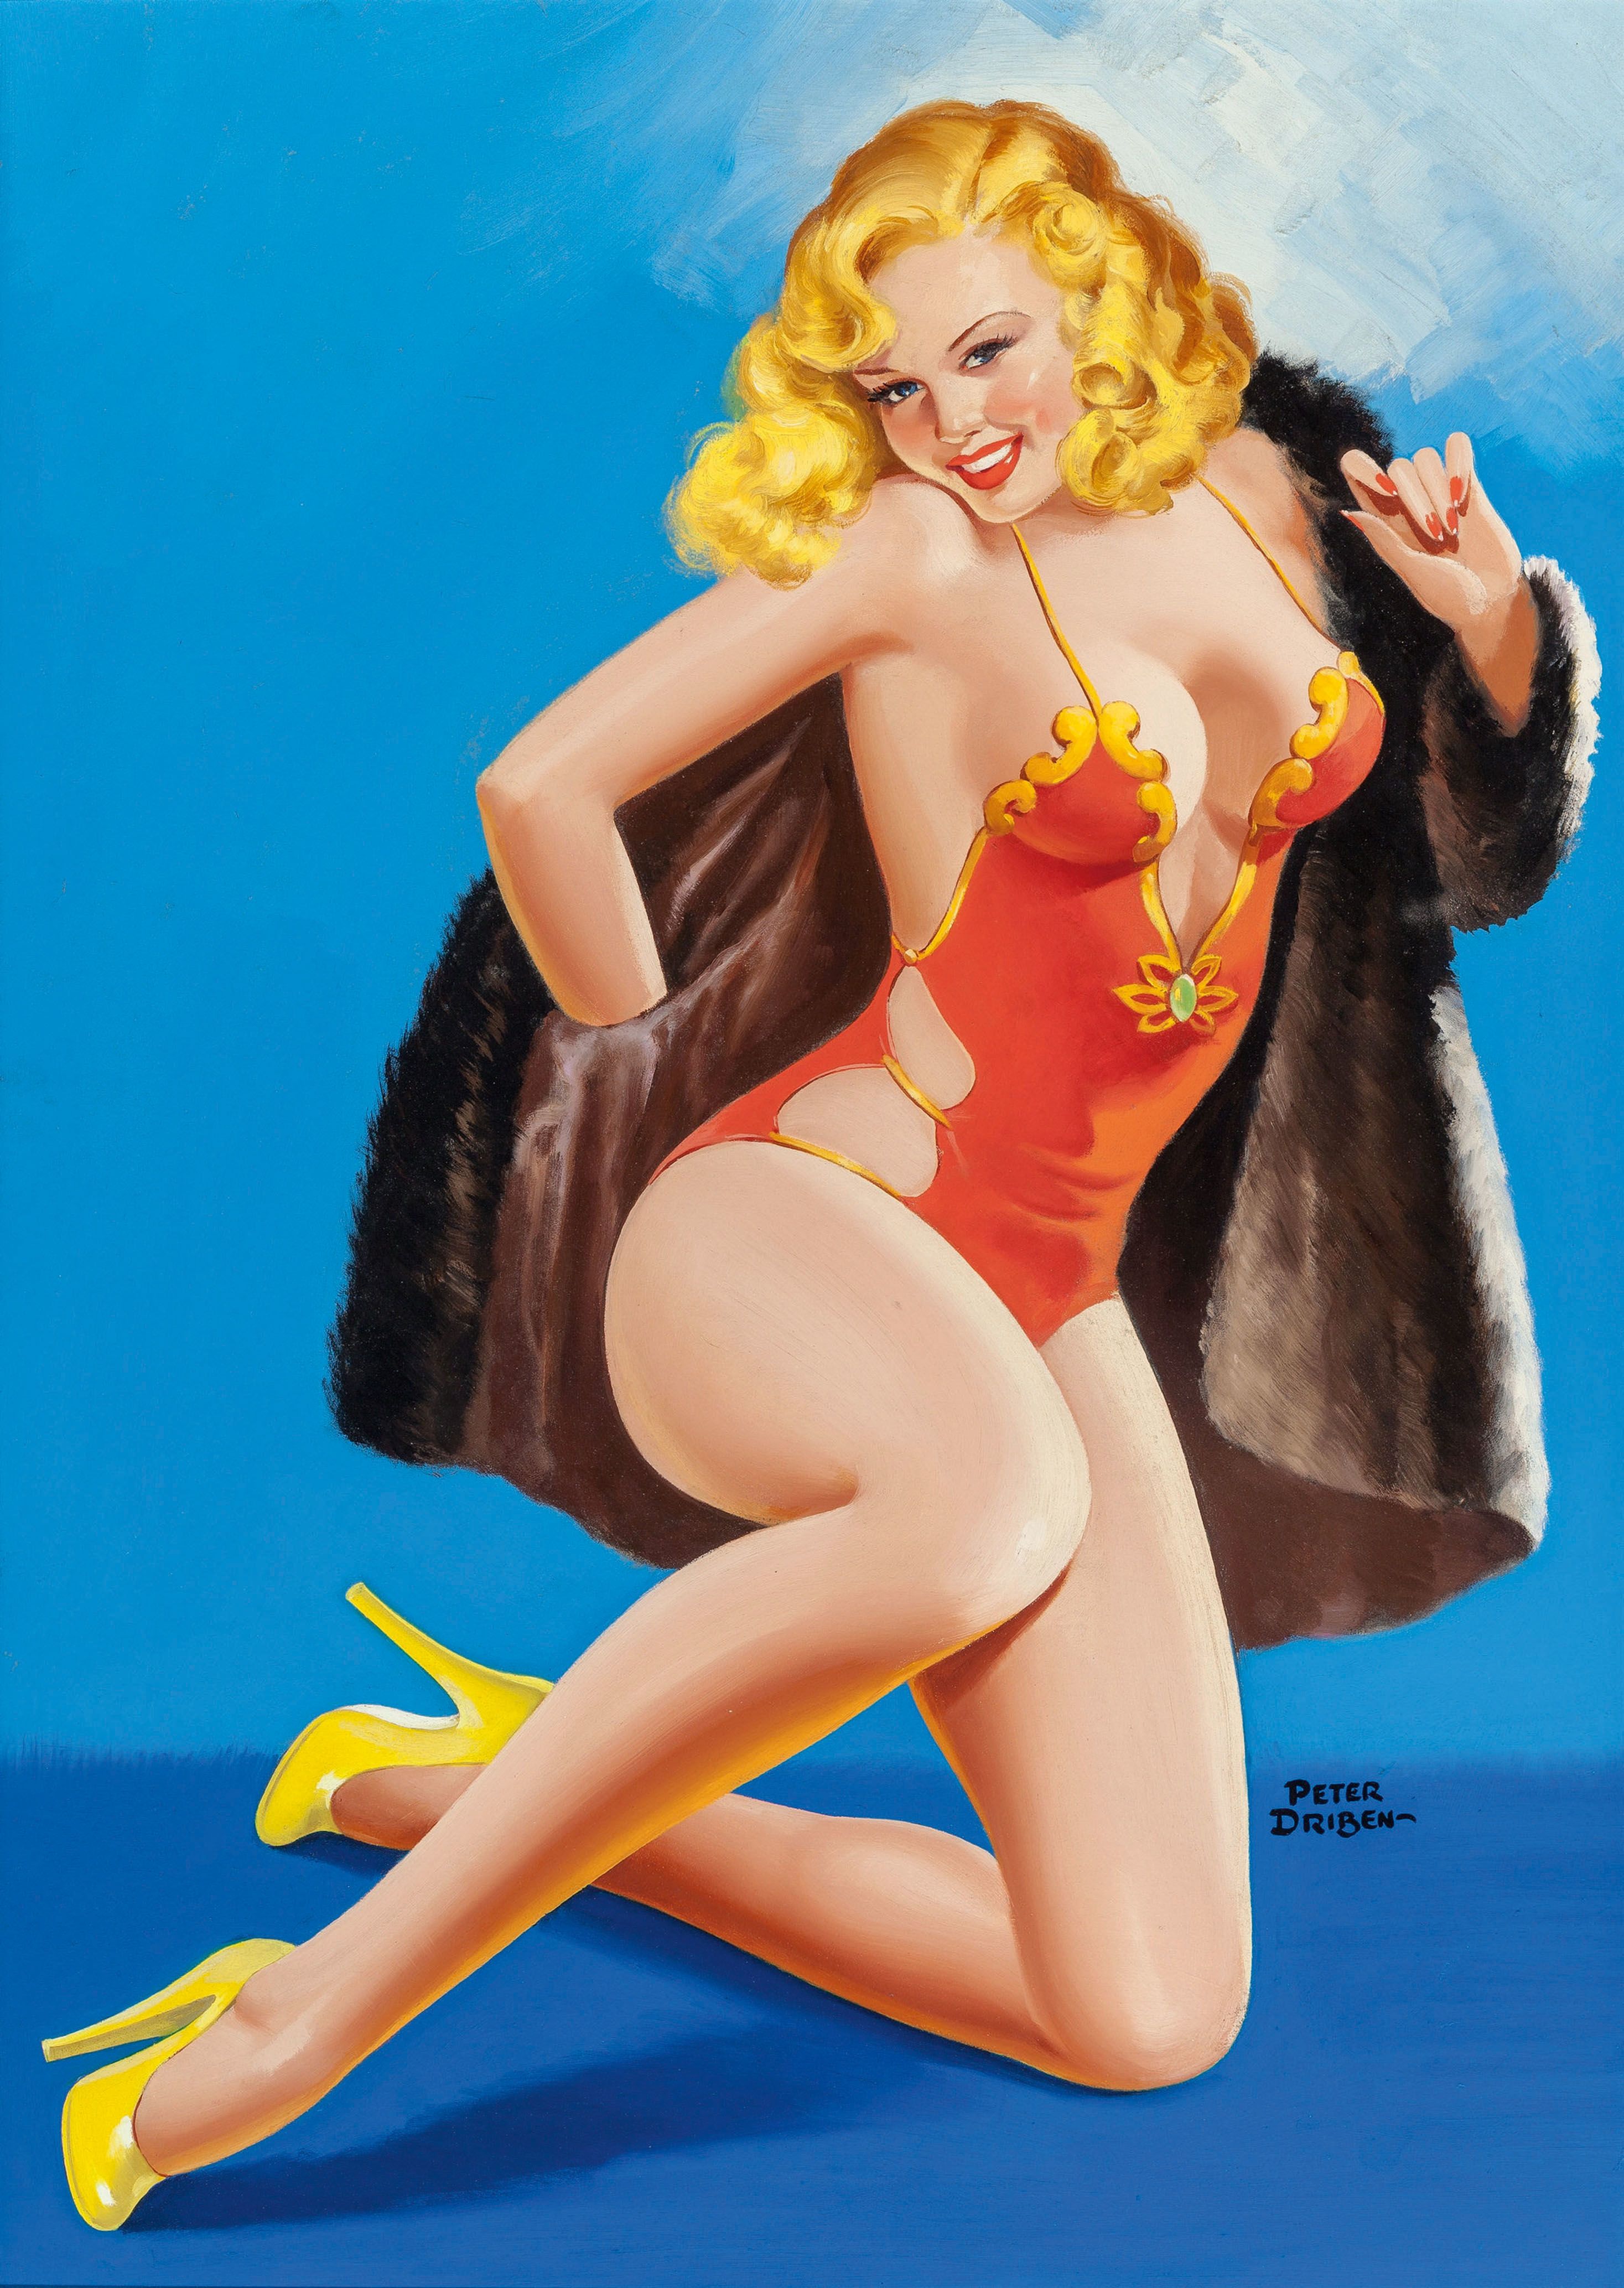 Sexy 50s Pin Up Girls - The lost art of the American pin-up | CNN